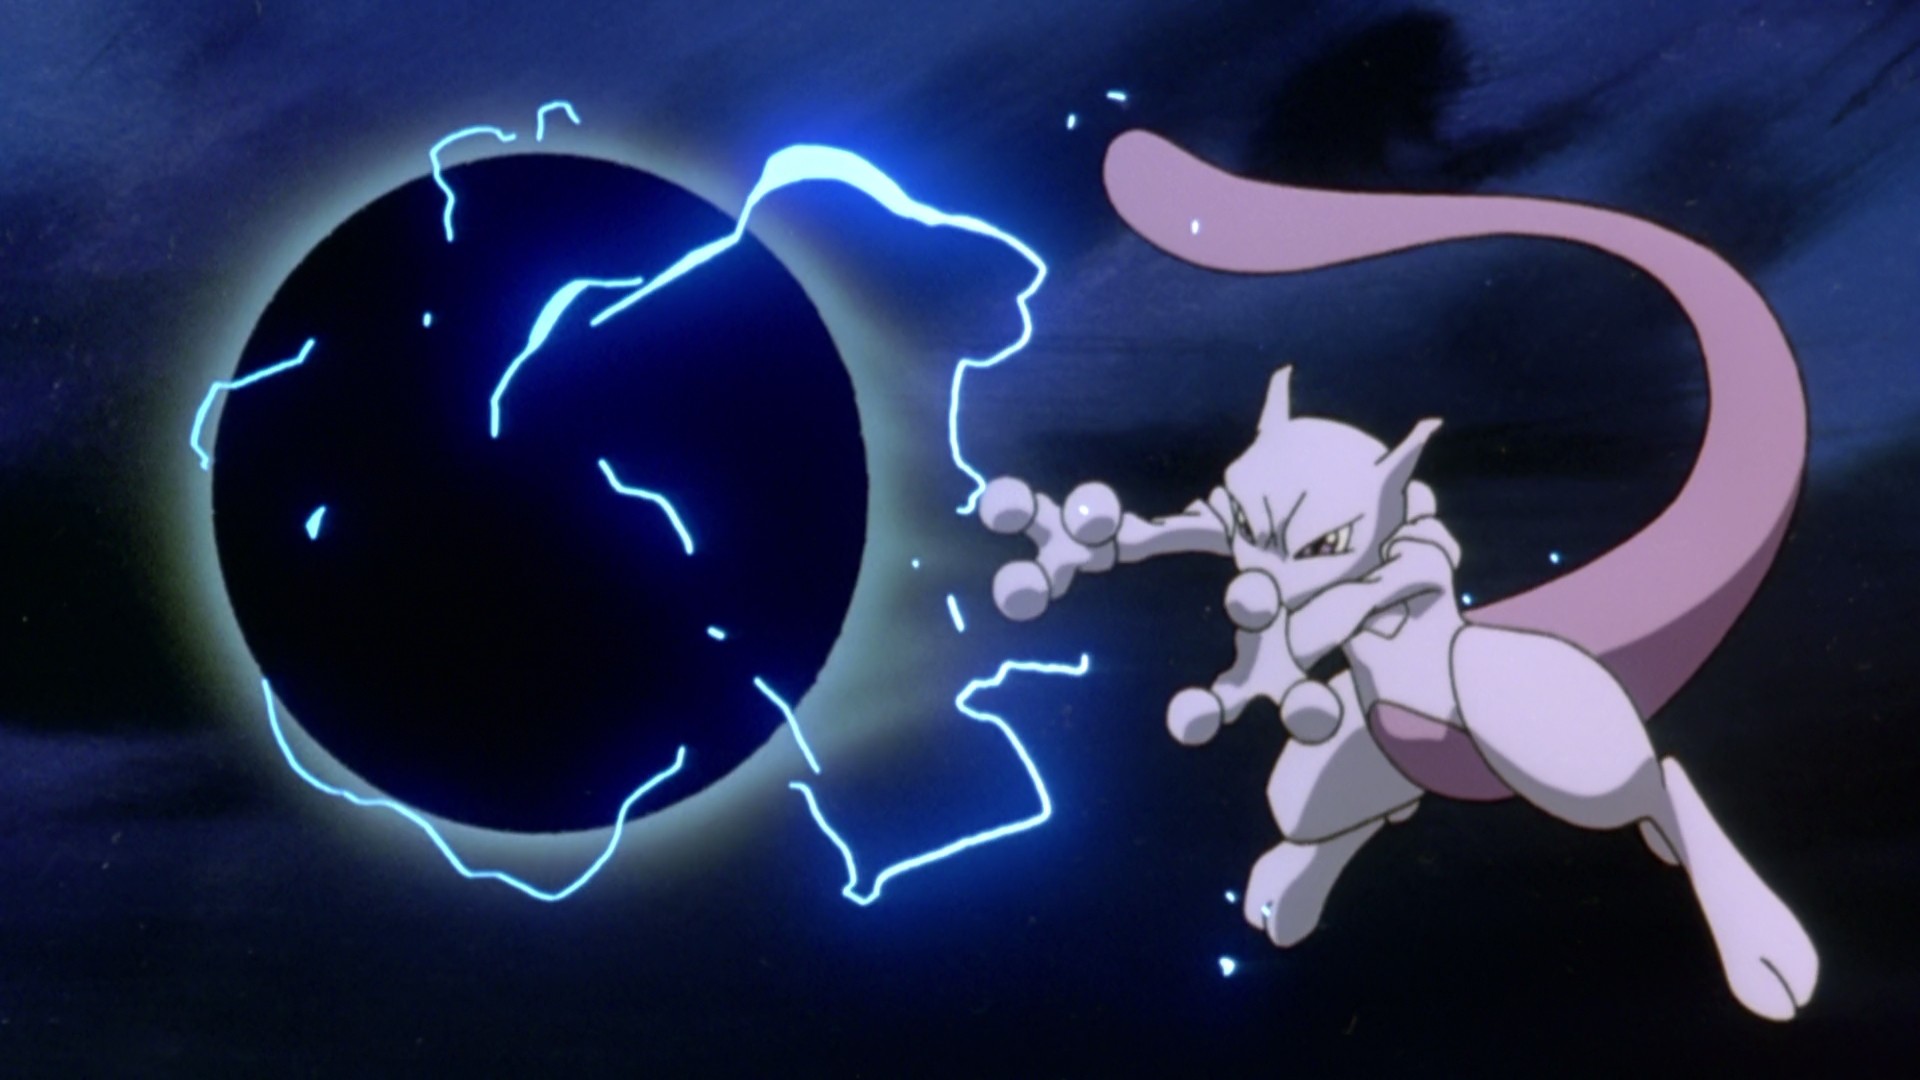 1920x1080 Title : 78 mewtwo (pokÃ©mon) hd wallpapers | background images – wallpaper  abyss. Dimension : 1920 x 1080. File Type : JPG/JPEG